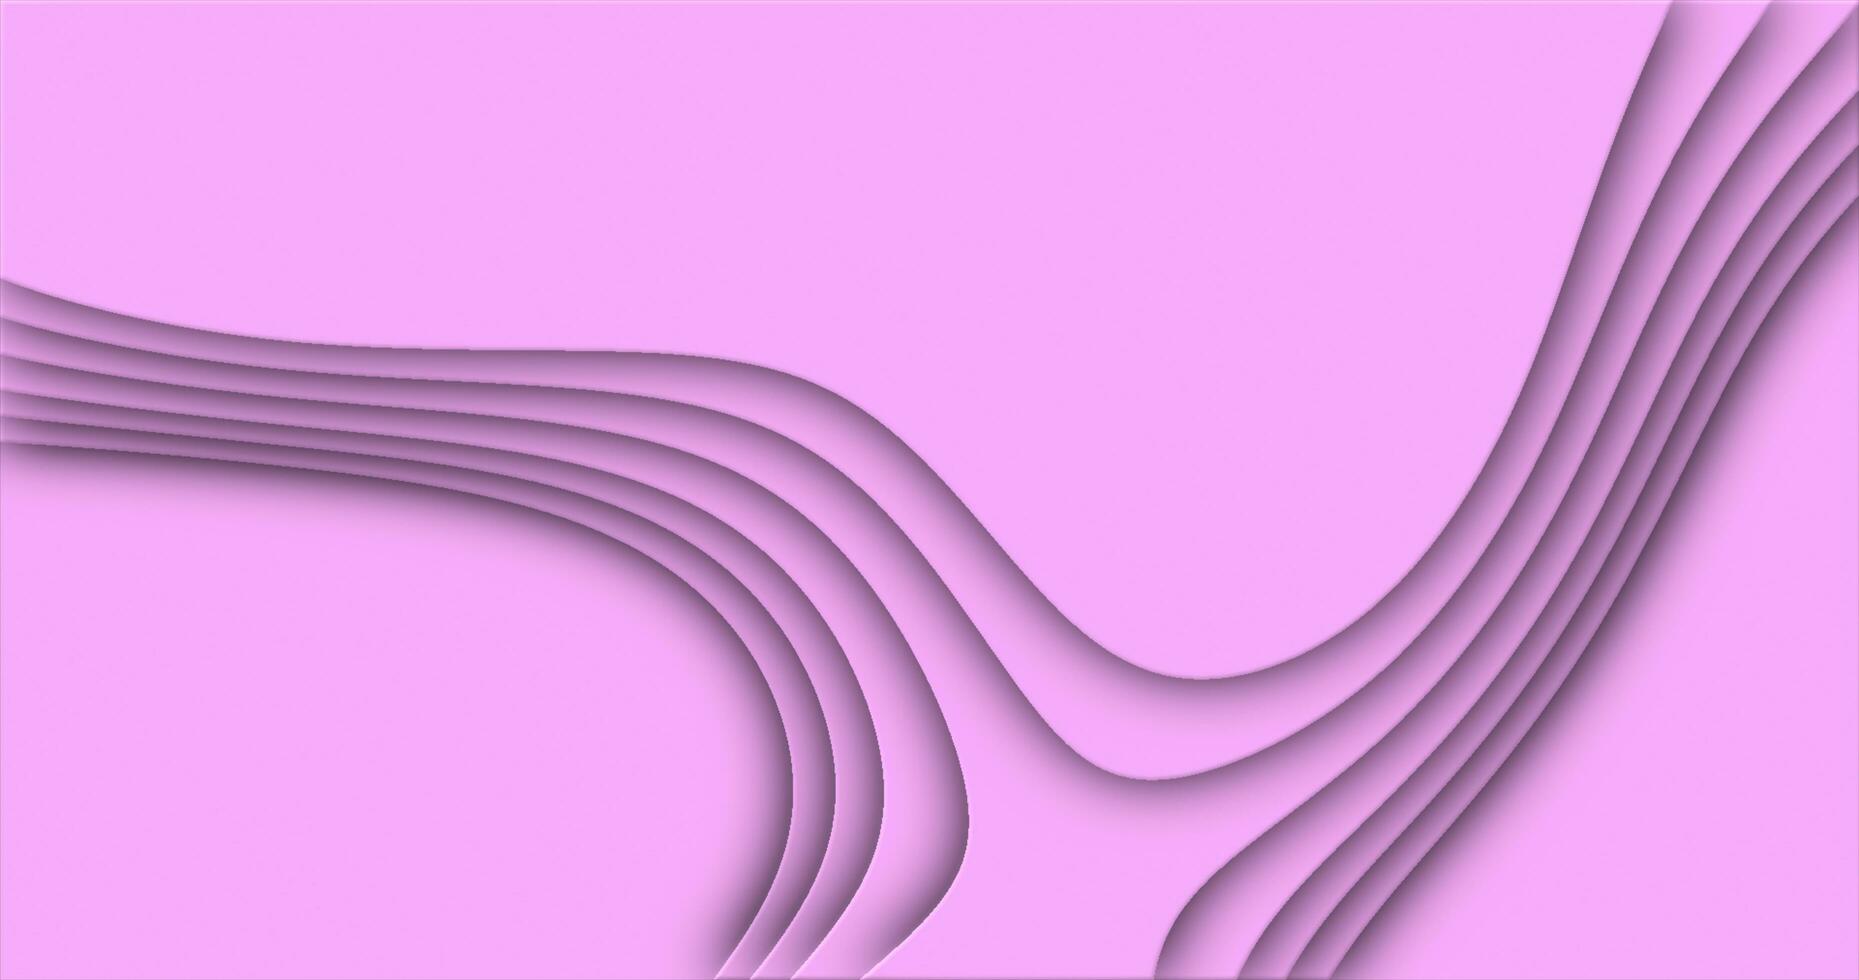 Pink cut curve abstract background pattern of lines and waves photo